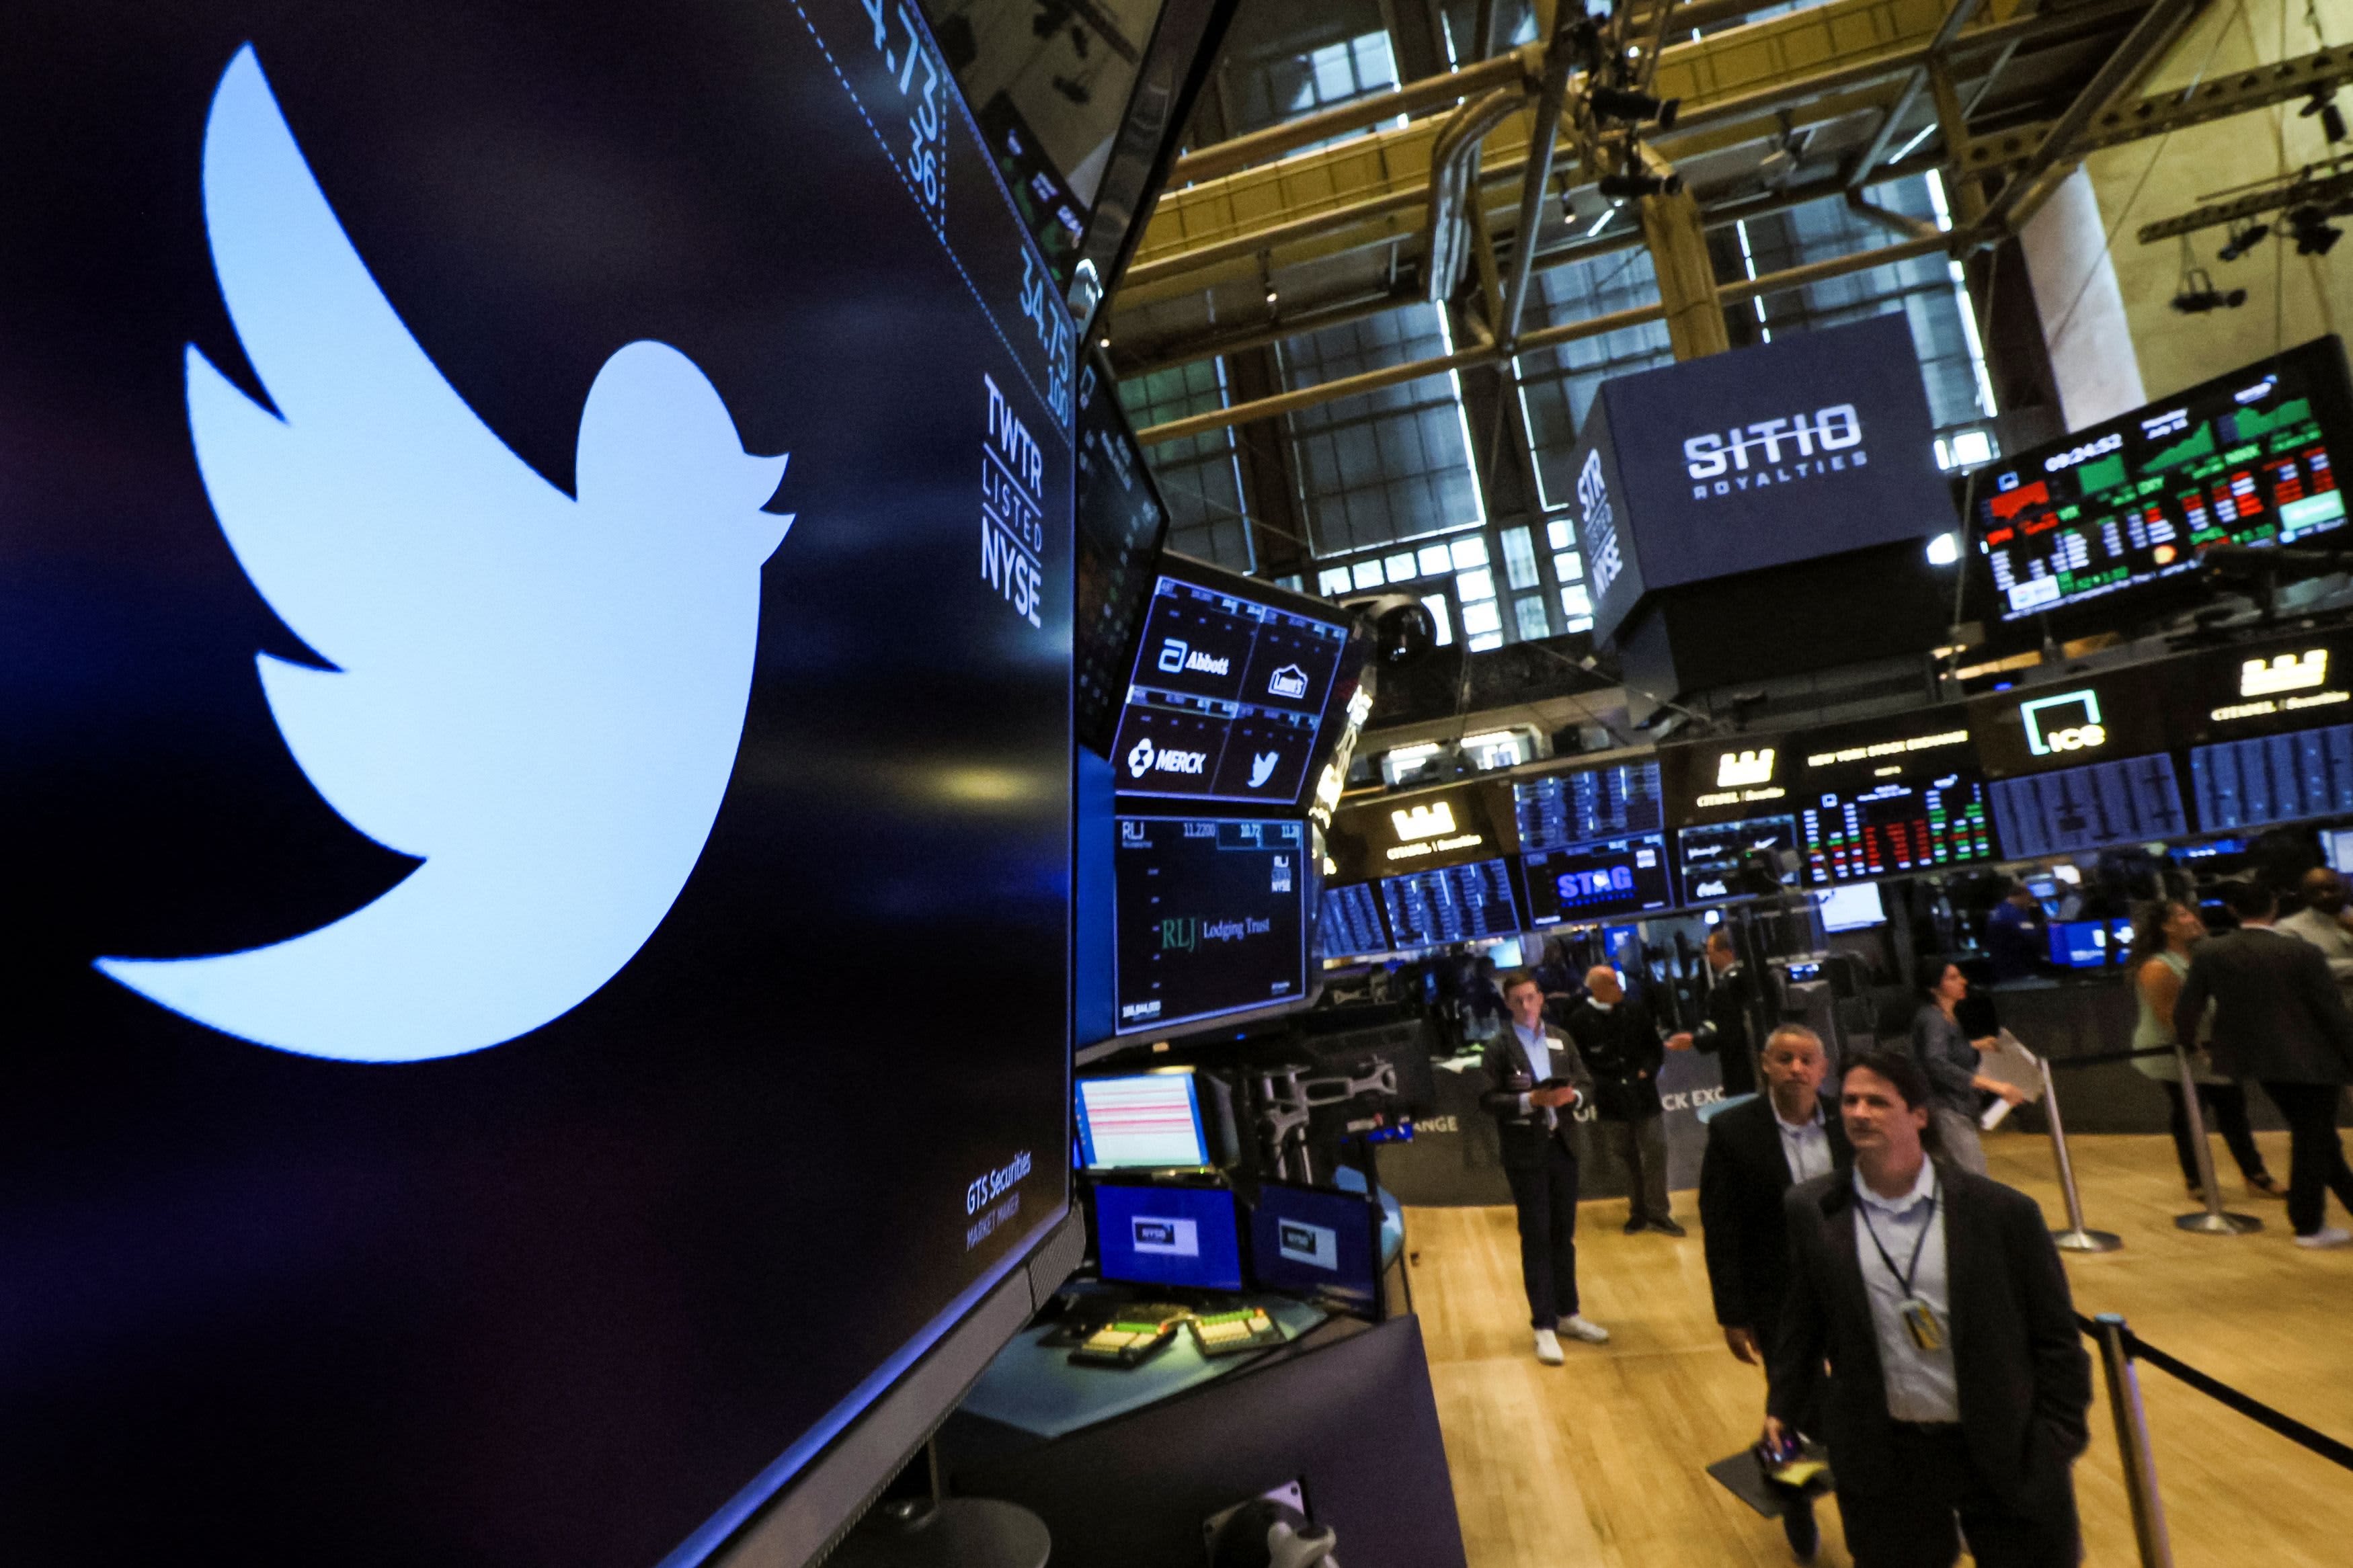 Twitter outage impacted users around the world Thursday morning